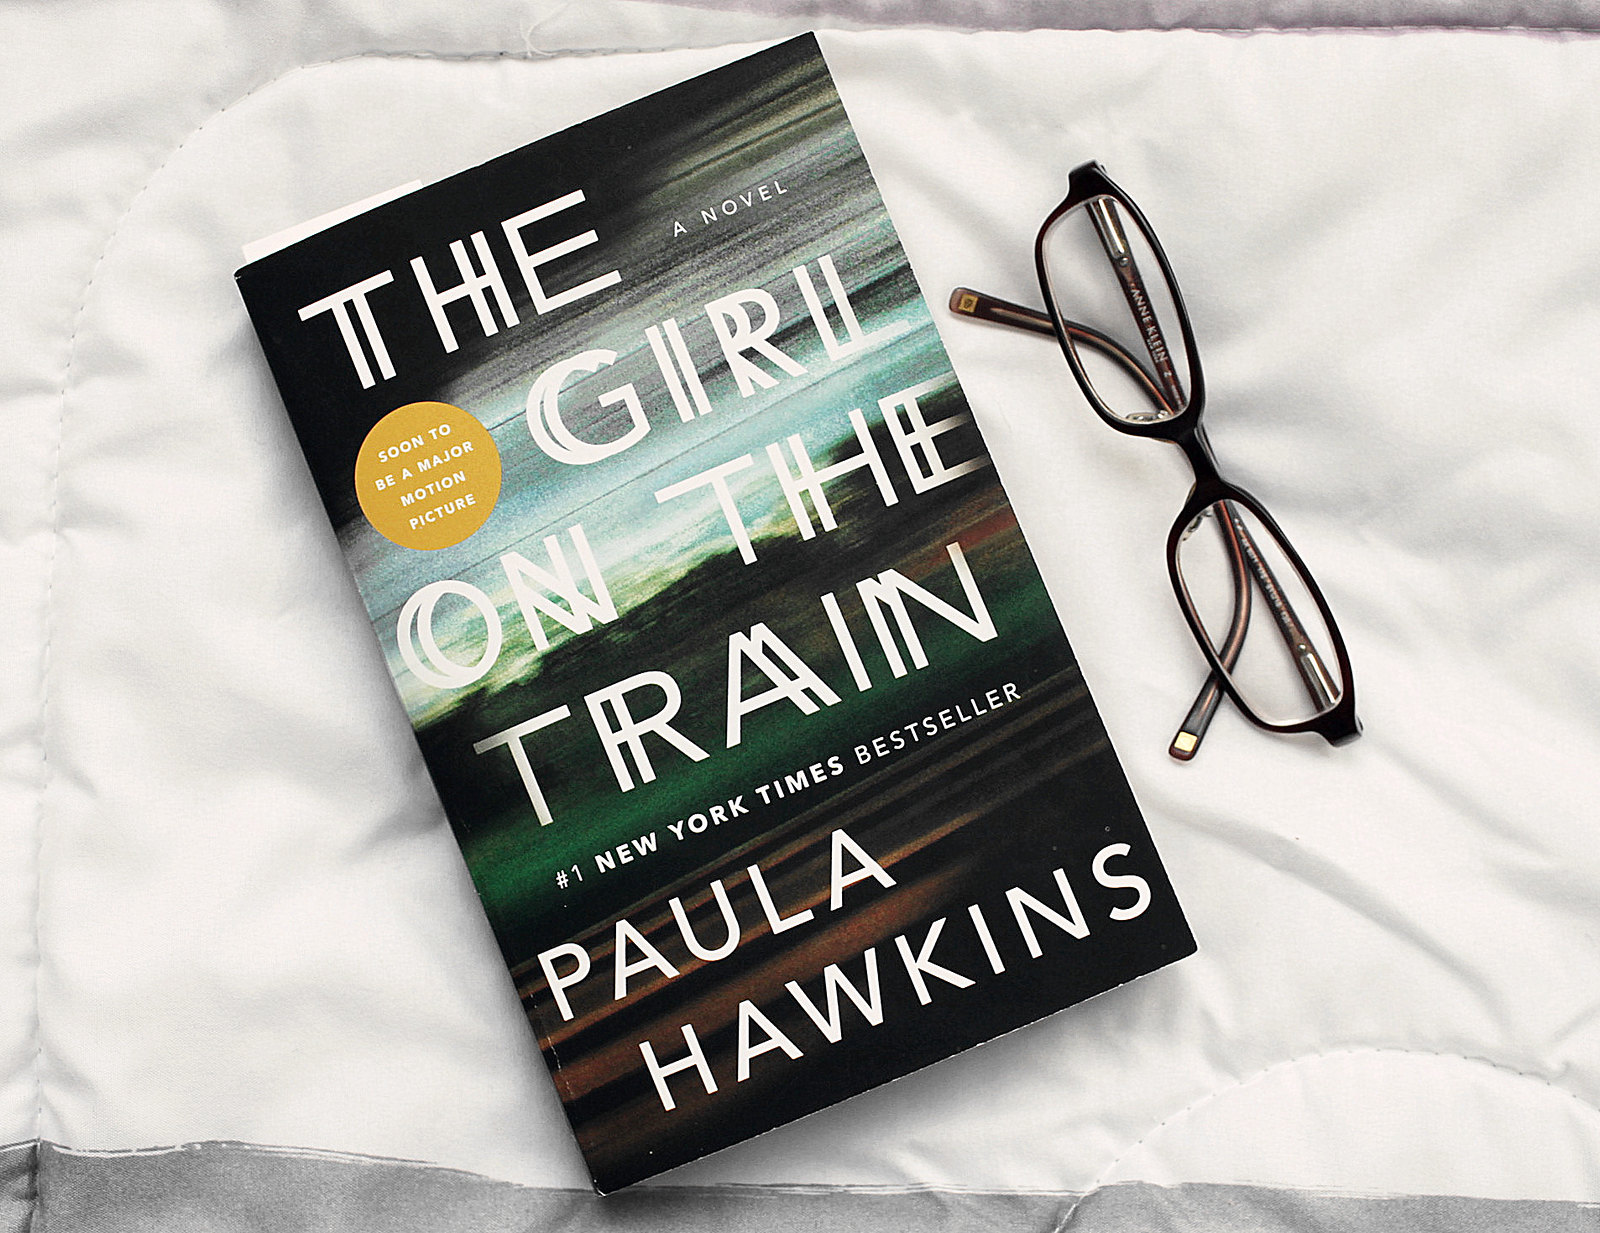 3435-the-girl-on-the-train-reading-books-lifestyle-elizabeeetht-clothestoyouuu